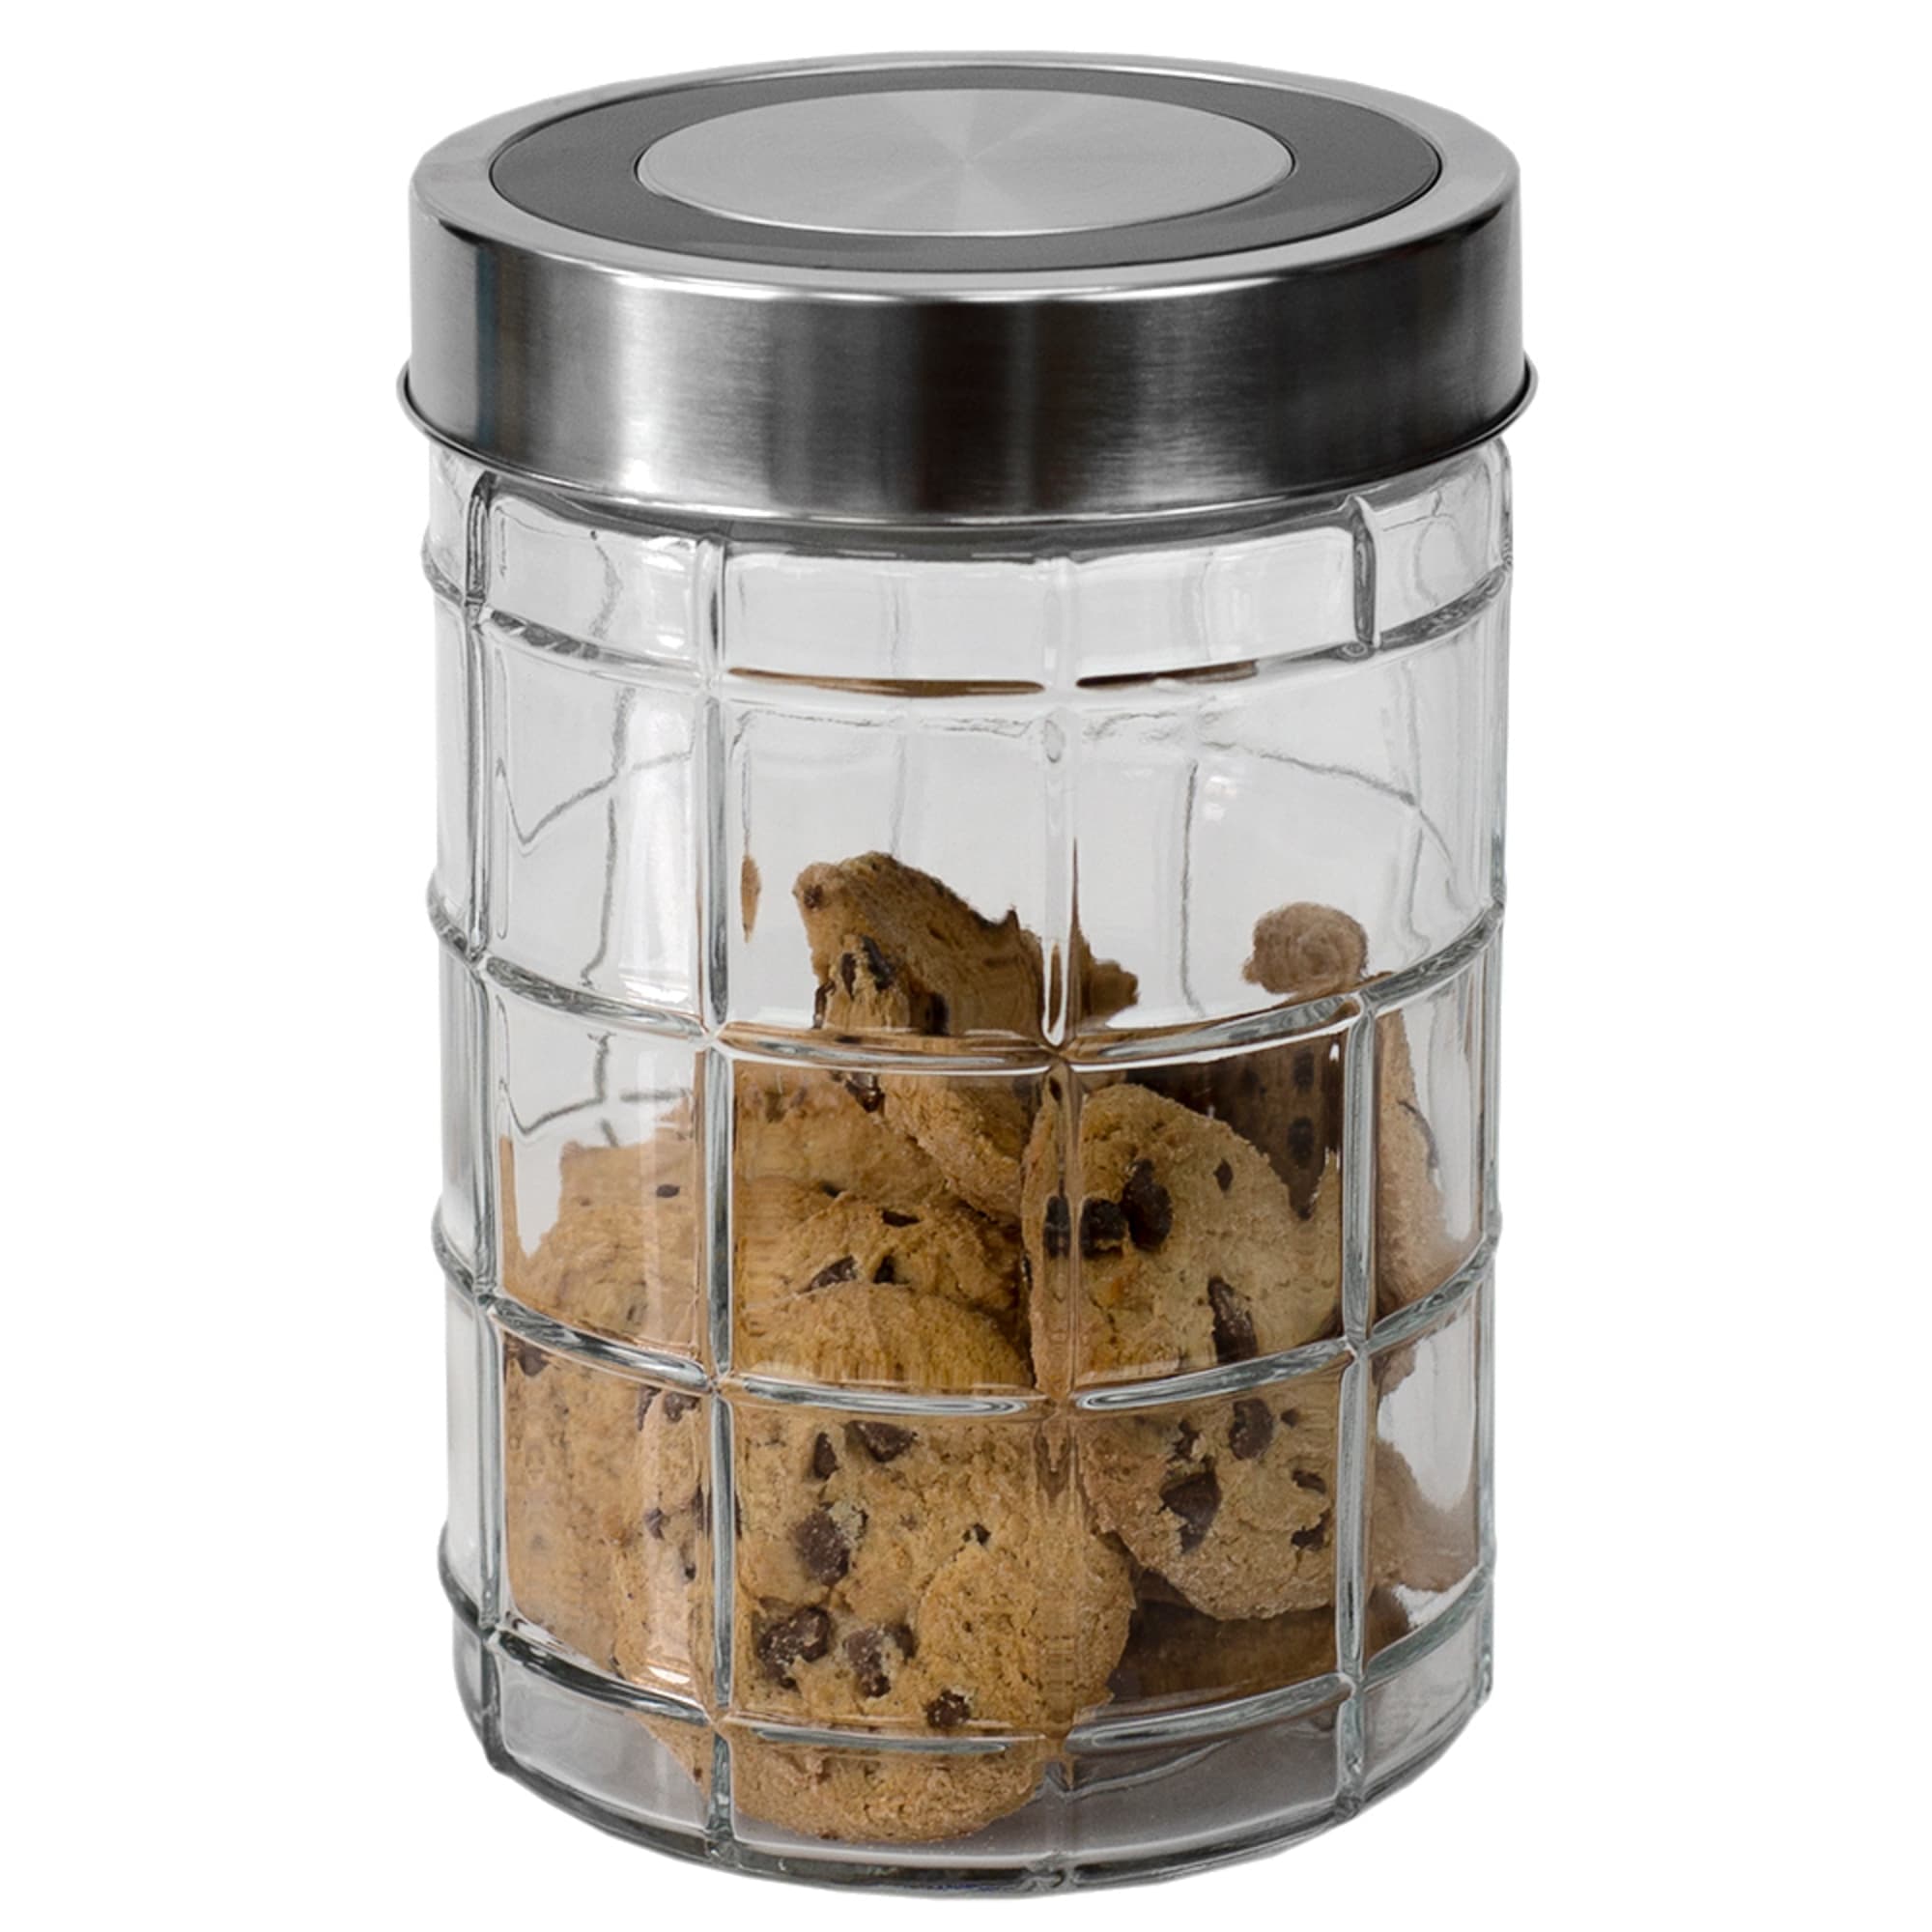 Home Basics Chex Collection 37 oz. Medium Glass Canister $2.50 EACH, CASE PACK OF 12